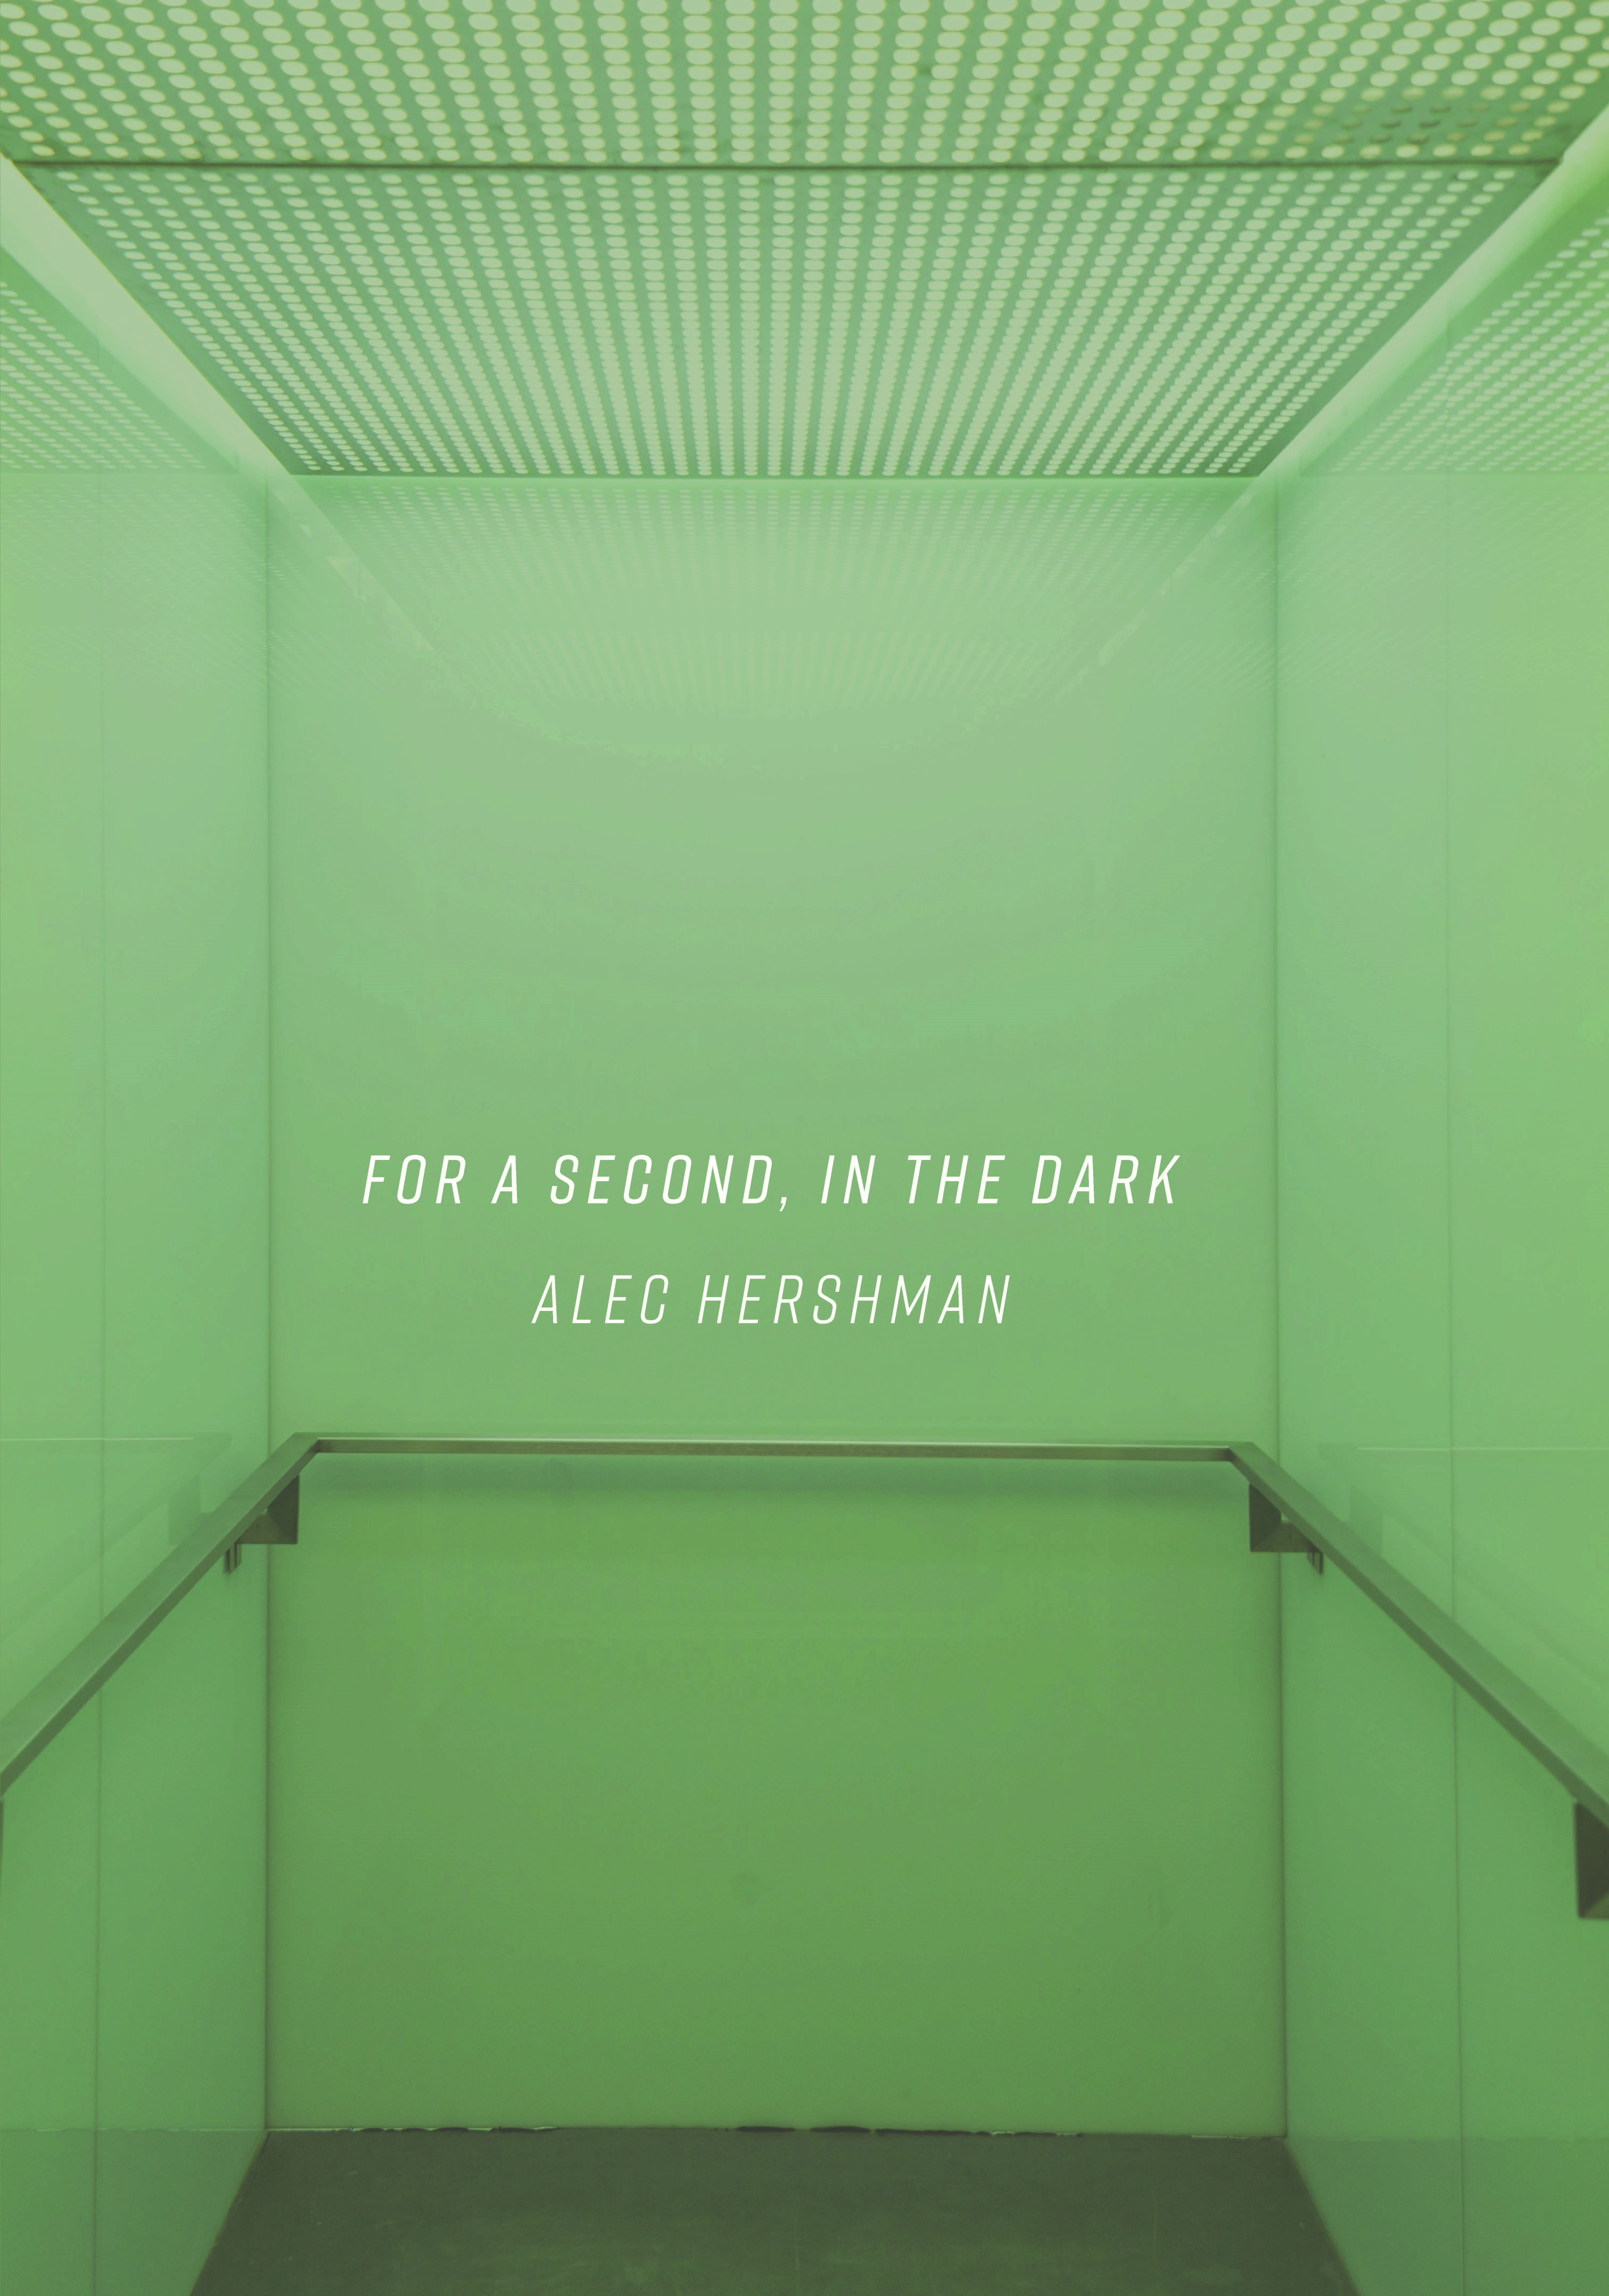 FOR A SECOND, IN THE DARK by Alec Hershman